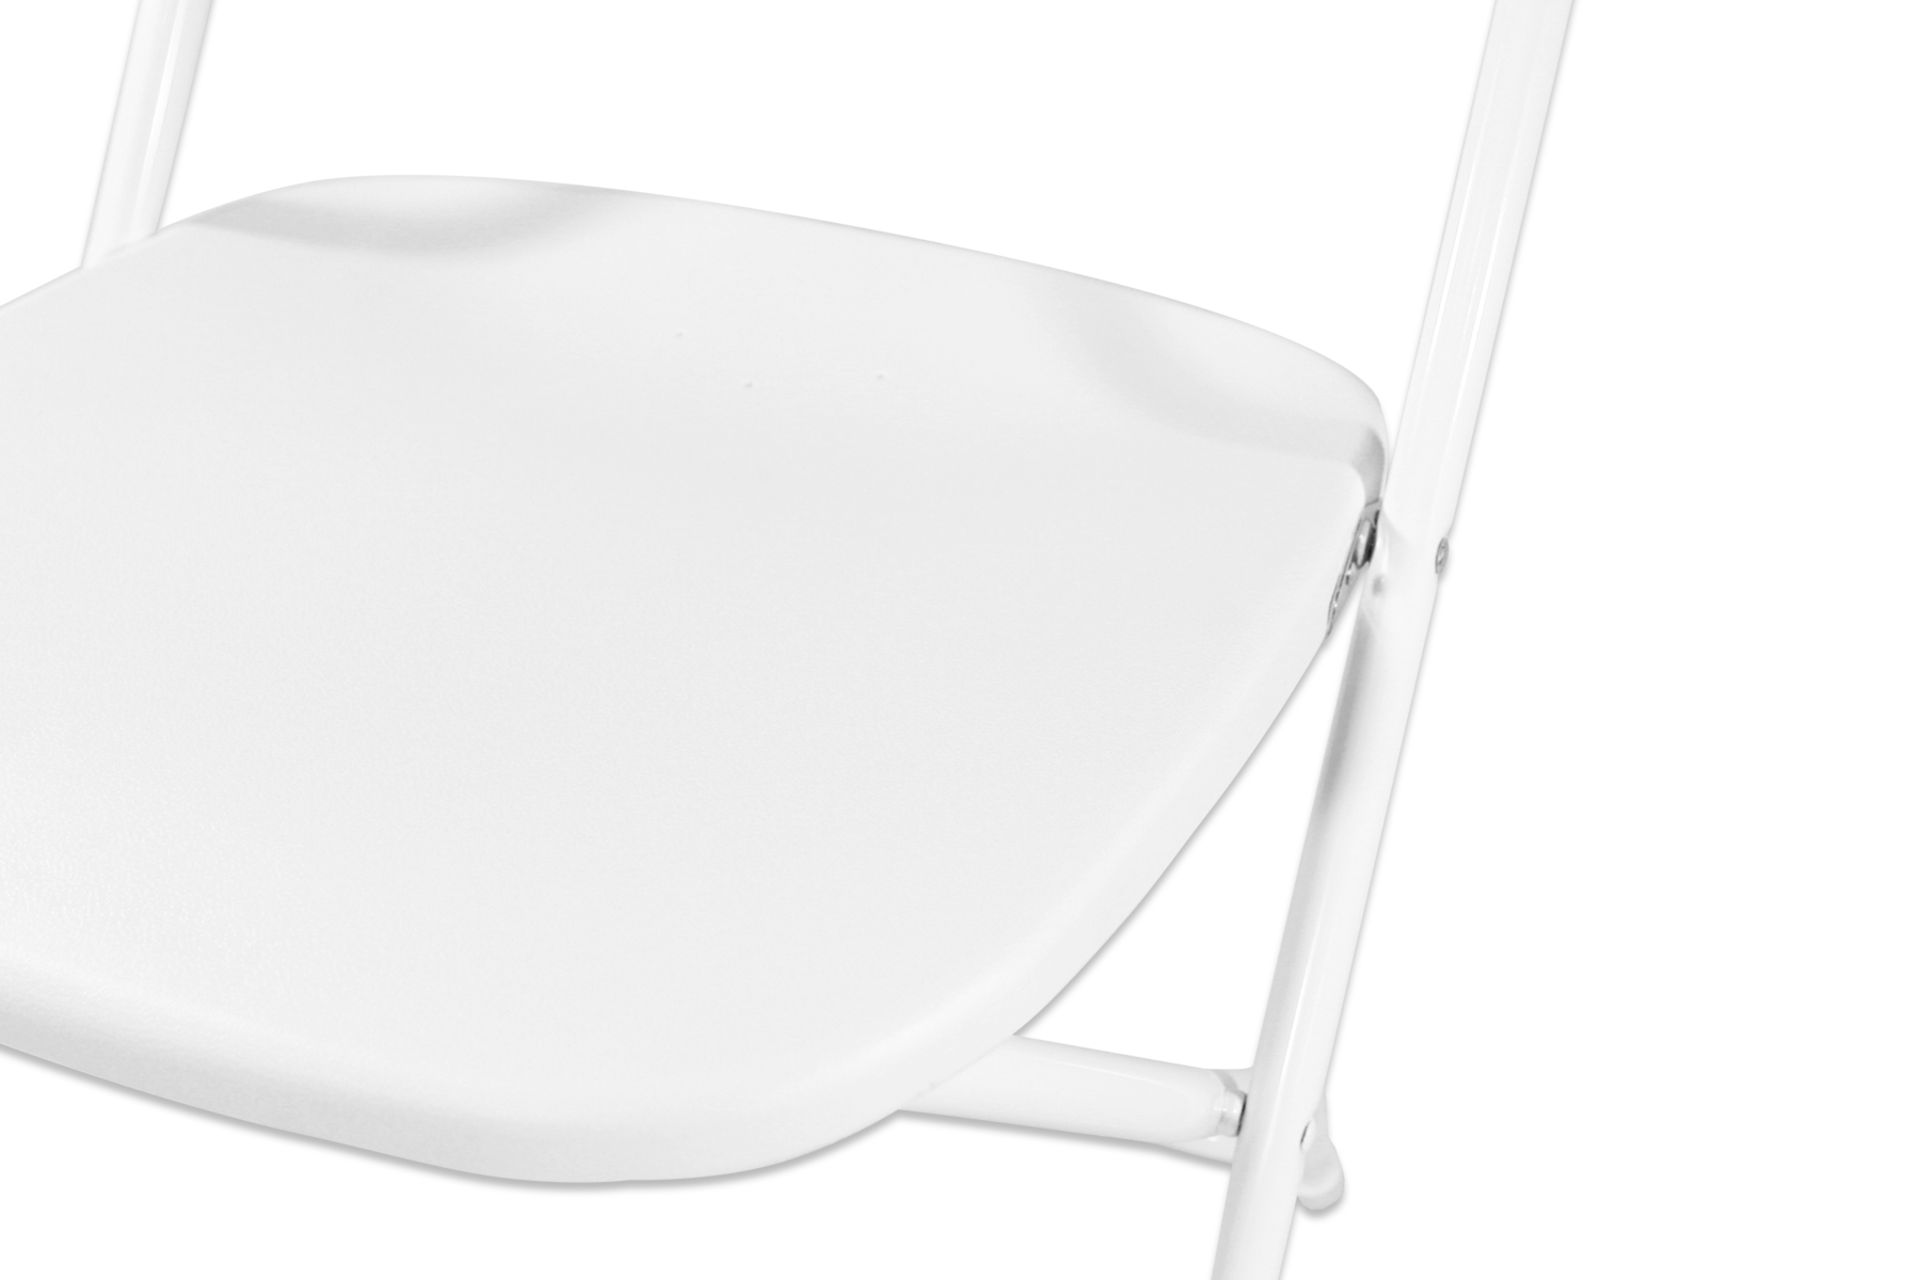 V *TRADE QTY* Grade A Folding Plastic Chair - White X180 YOUR BID PRICE TO BE MULTIPLIED BY ONE - Image 5 of 6